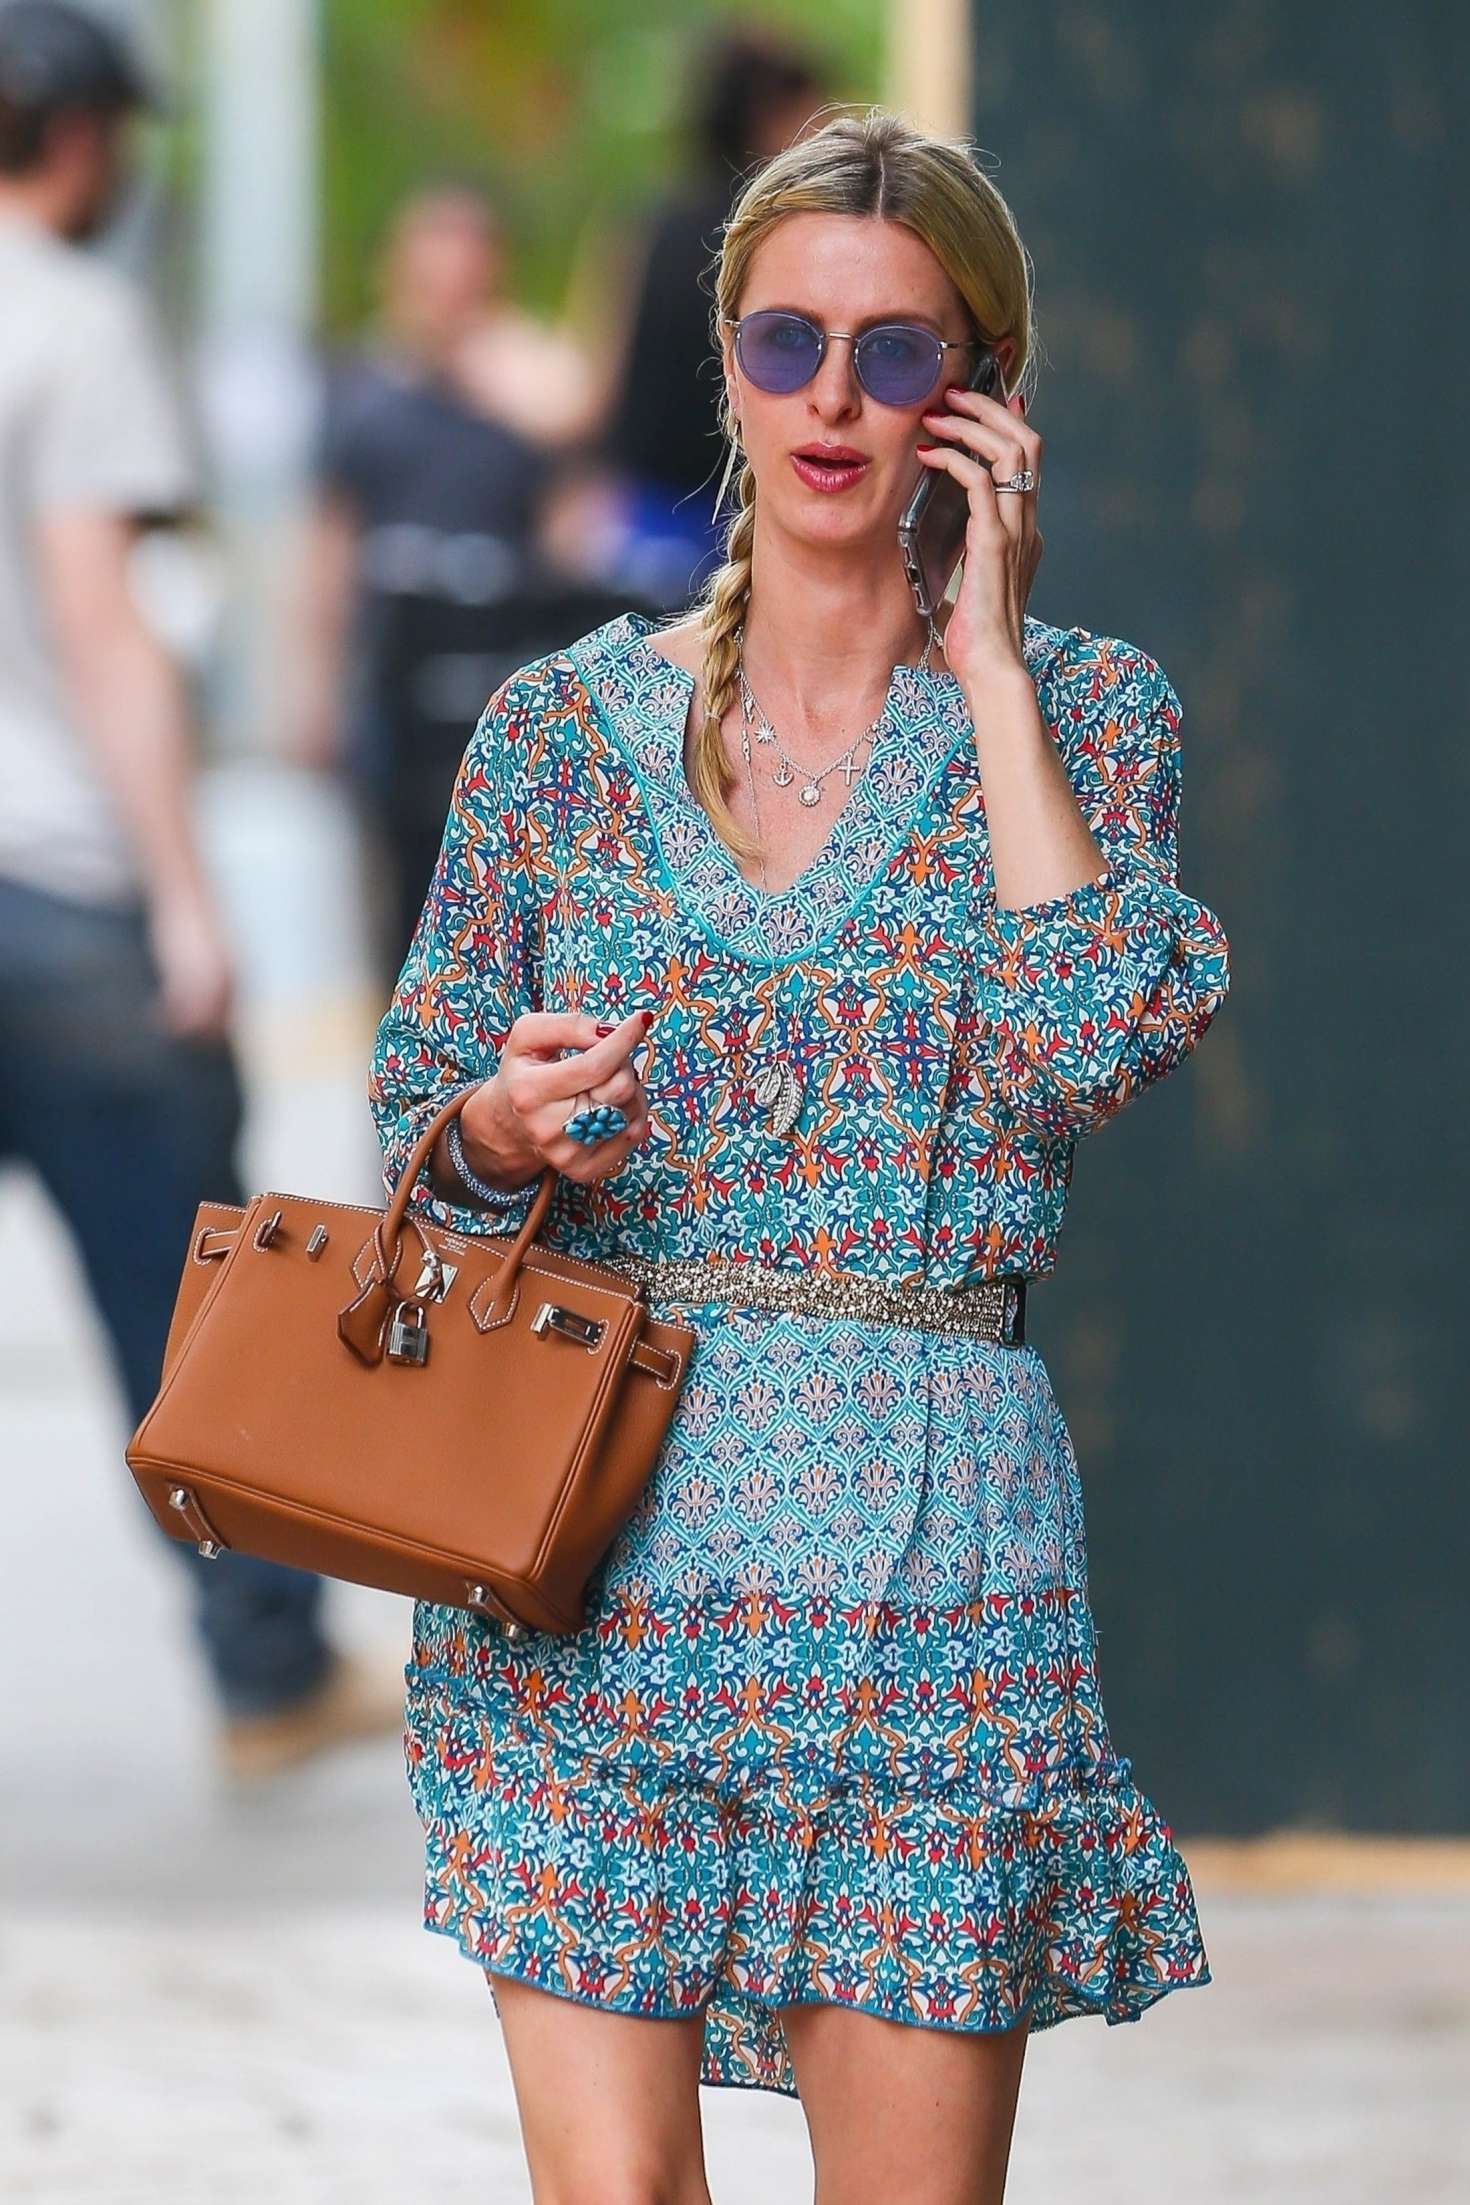 Nicky Hilton in Mini Dress - Out in the East Village